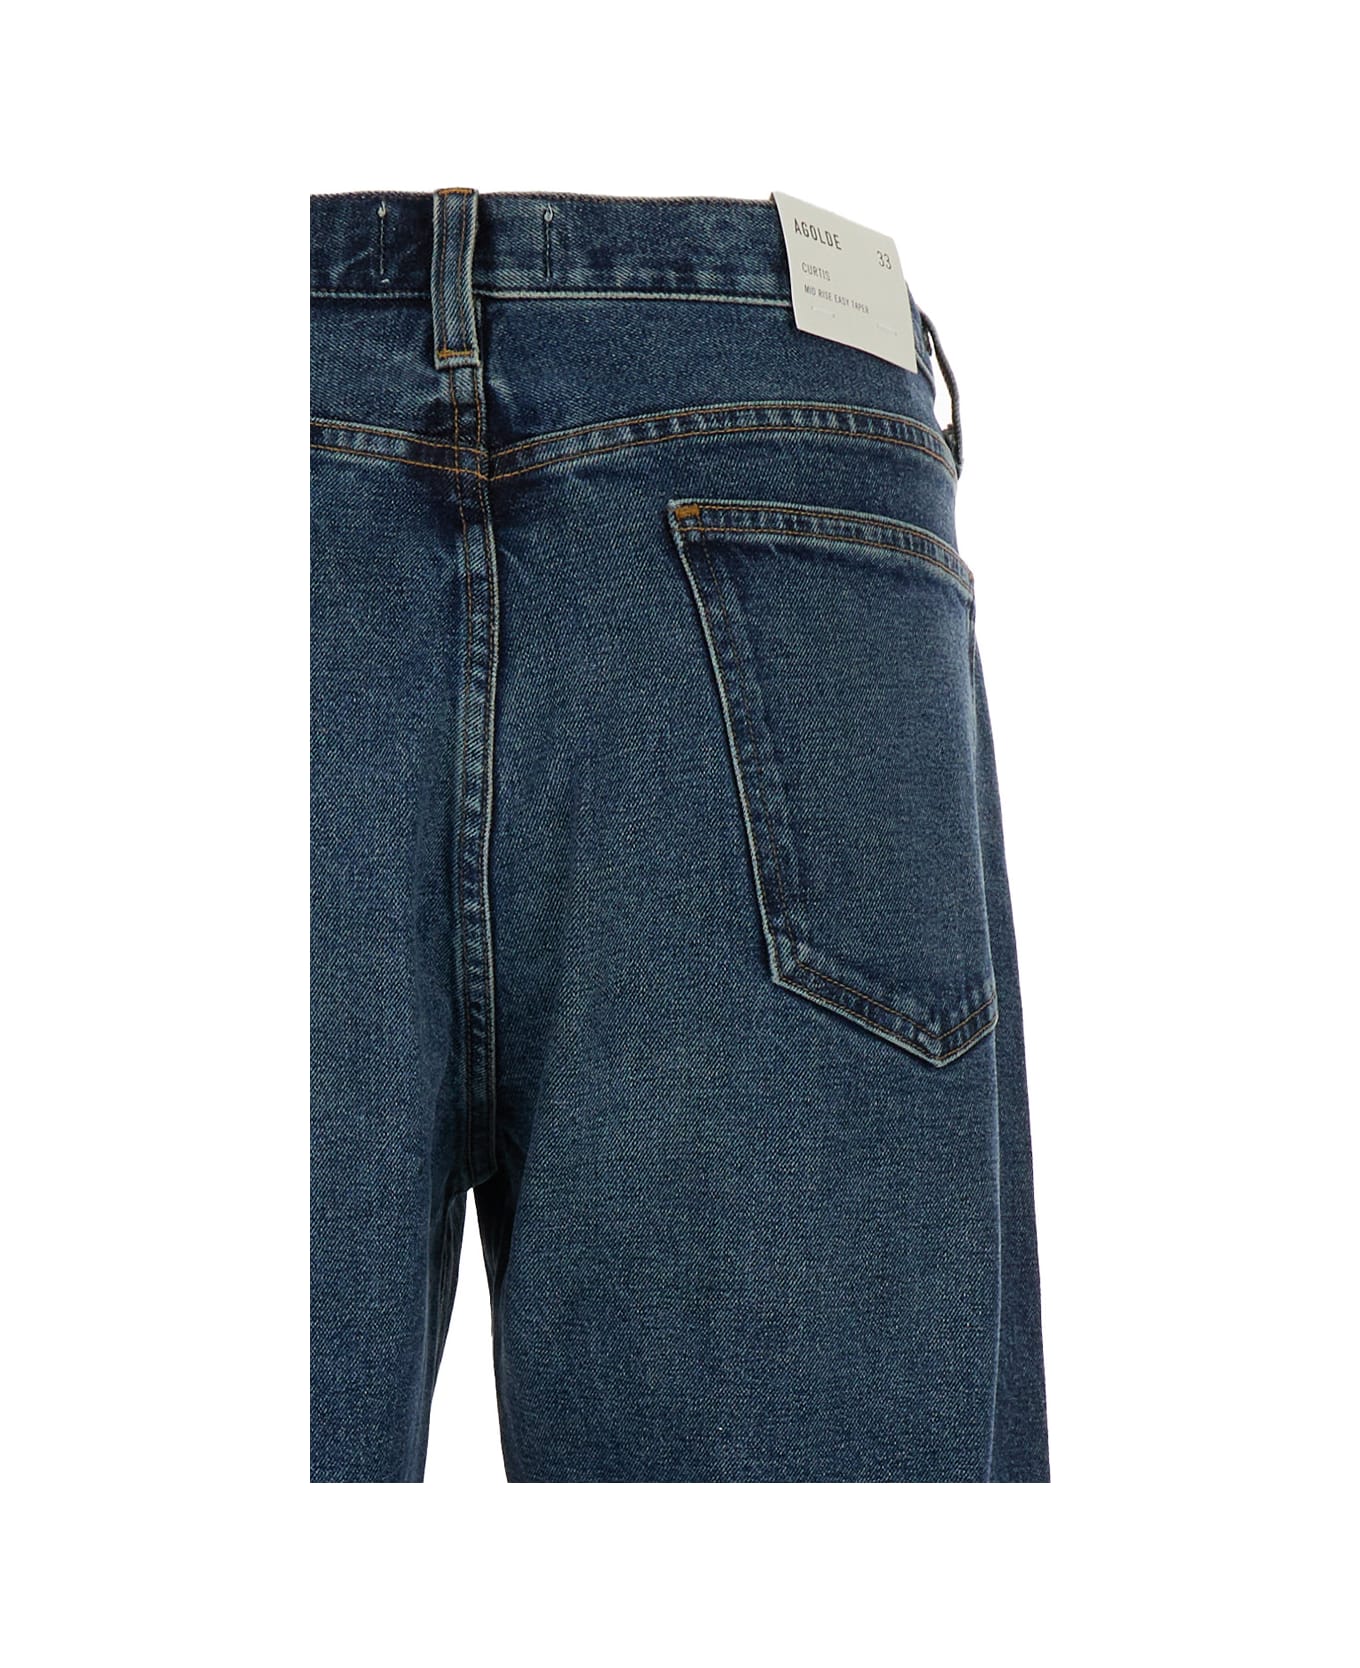 AGOLDE Blue Straight Jeans With Branded Button In Cotton Blend Denim Man - Blu